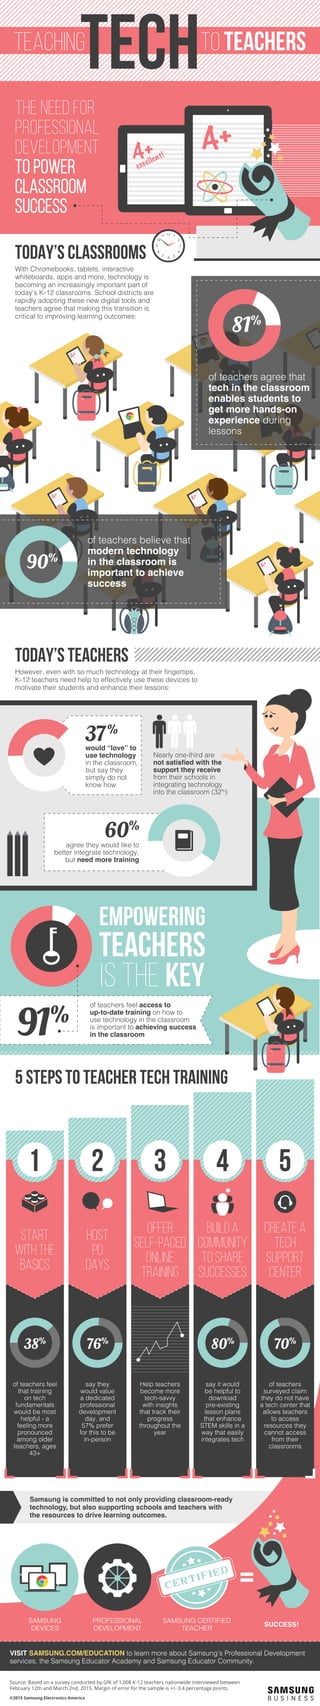 The Need for
Professional
Development
to Power
Classroom
Success
TEACHING TO TEACHERS
TODAY’S CLASSROOMS
TODAY’S TEACHERS
TECH
With Chromebooks, tablets, interactive
whiteboards, apps and more, technology is
becoming an increasingly important part of
today’s K-12 classrooms. School districts are
rapidly adopting these new digital tools and
teachers agree that making this transition is
critical to improving learning outcomes:
However, even with so much technology at their fingertips,
K-12 teachers need help to effectively use these devices to
motivate their students and enhance their lessons:
Samsung is committed to not only providing classroom-ready
technology, but also supporting schools and teachers with
the resources to drive learning outcomes.
of teachers believe that
modern technology
in the classroom is
important to achieve
success
of teachers agree that
tech in the classroom
enables students to
get more hands-on
experience during
lessons
90%
37%
would “love” to
use technology
in the classroom,
but say they
simply do not
know how
Nearly one-third are
not satisfied with the
support they receive
from their schools in
integrating technology
into the classroom (32%
)
60%
agree they would like to
better integrate technology,
but need more training
Empowering
TEACHERS
IS THE Key
of teachers feel access to
up-to-date training on how to
use technology in the classroom
is important to achieving success
in the classroom91%
1 2 3 4 5
5 Steps to Teacher Tech Training
Start
with the
basics
Host
PD
DAYS
Offer
SELF-PACED
online
training
Build a
community
to share
successes
Create a
tech
support
center
of teachers feel
that training
on tech
fundamentals
would be most
helpful - a
feeling more
pronounced
among older
teachers, ages
43+
say they
would value
a dedicated
professional
development
day, and
57% prefer
for this to be
in-person
Help teachers
become more
tech-savvy
with insights
that track their
progress
throughout the
year
say it would
be helpful to
download
pre-existing
lesson plans
that enhance
STEM skills in a
way that easily
integrates tech
of teachers
surveyed claim
they do not have
a tech center that
allows teachers
to access
resources they
cannot access
from their
classrooms
76%
38%
80%
70%
VISIT SAMSUNG.COM/EDUCATION to learn more about Samsung’s Professional Development
services, the Samsung Educator Academy and Samsung Educator Community.
Source: Based on a survey conducted by GfK of 1,008 K-12 teachers nationwide interviewed between
February 12th and March 2nd, 2015. Margin of error for the sample is +/- 3.4 percentage points.
©2015 Samsung Electronics America
A+A+
excellent!
SAMSUNG
DEVICES
PROFESSIONAL
DEVELOPMENT
SUCCESS!
SAMSUNG CERTIFIED
TEACHER
81%
 